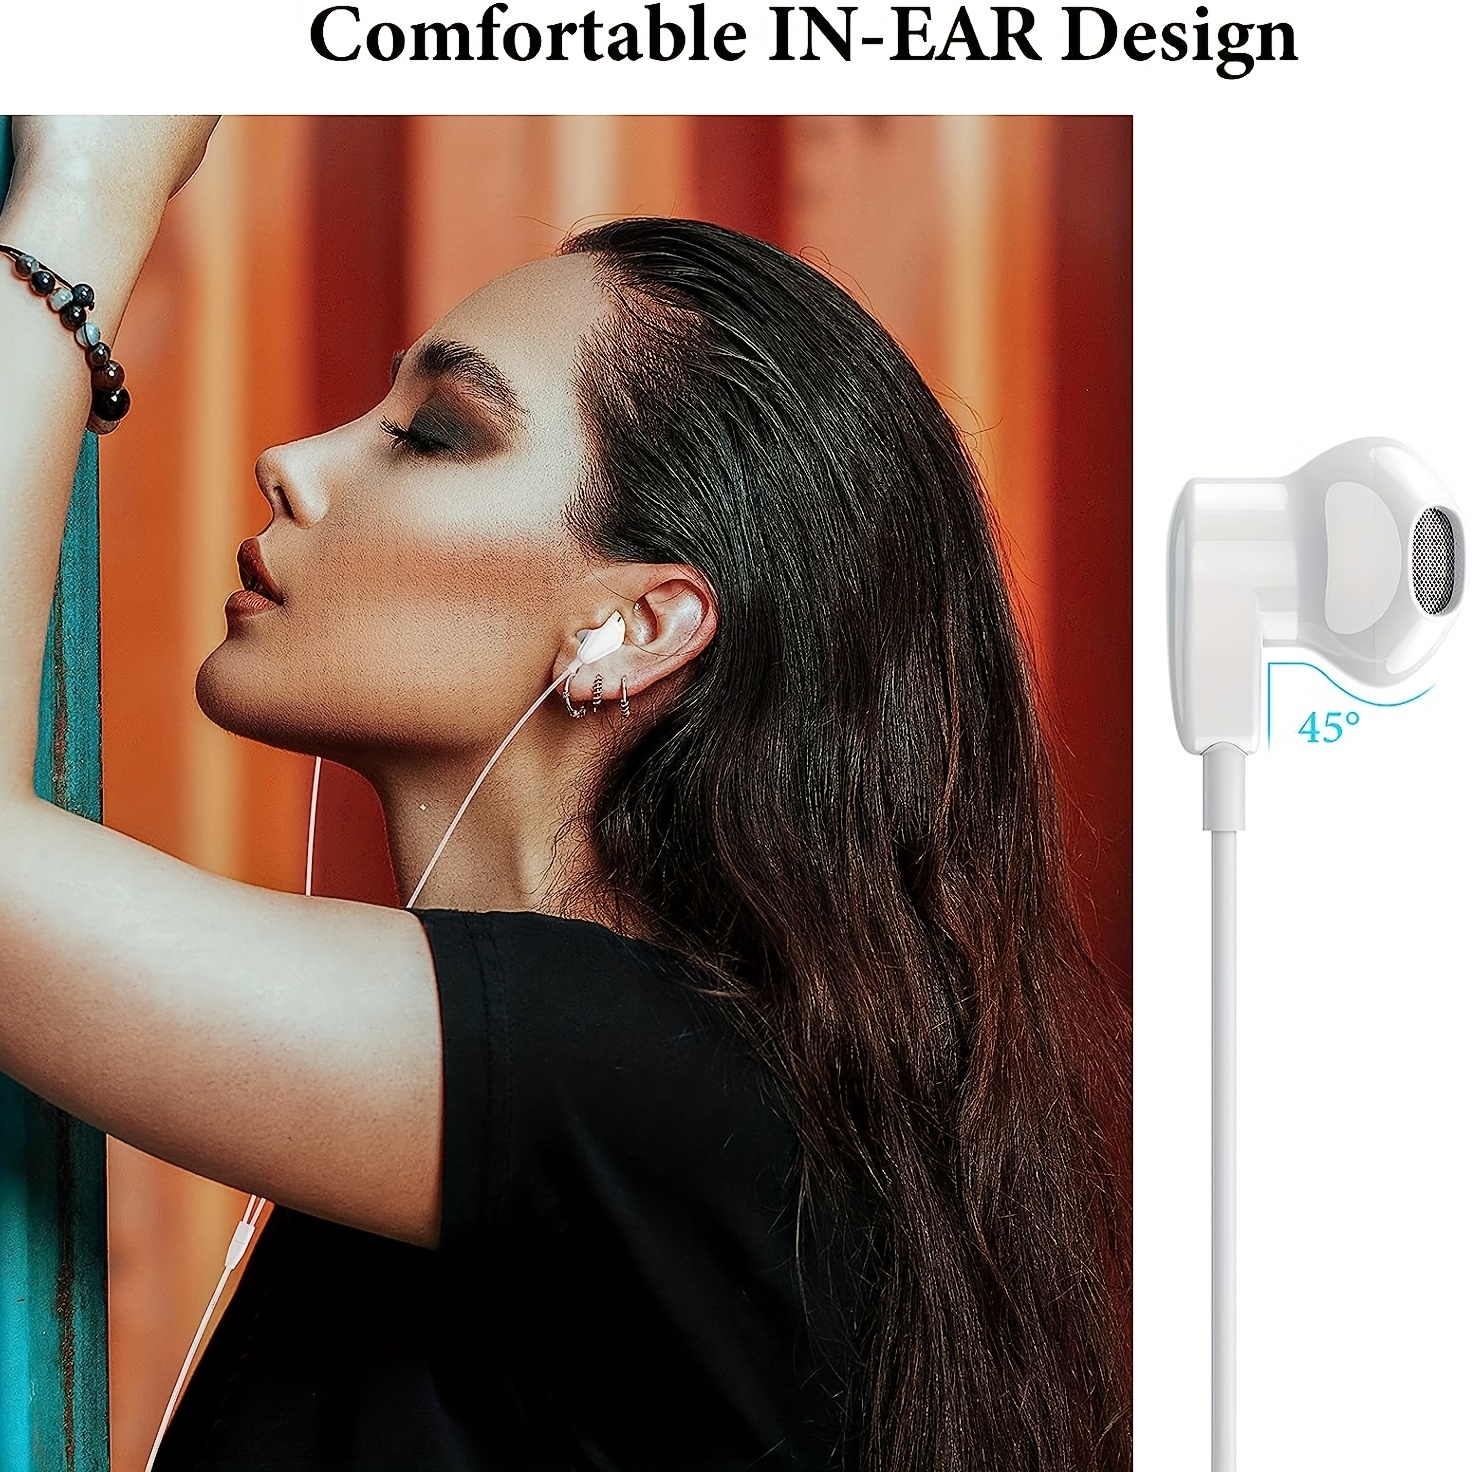 USB C Headphones for Samsung Galaxy S23 Ultra S22 S21 FE S20 A54 A53 USB C  Earphones with Microphone in-Ear Headphones Wired Earbuds USB Type C